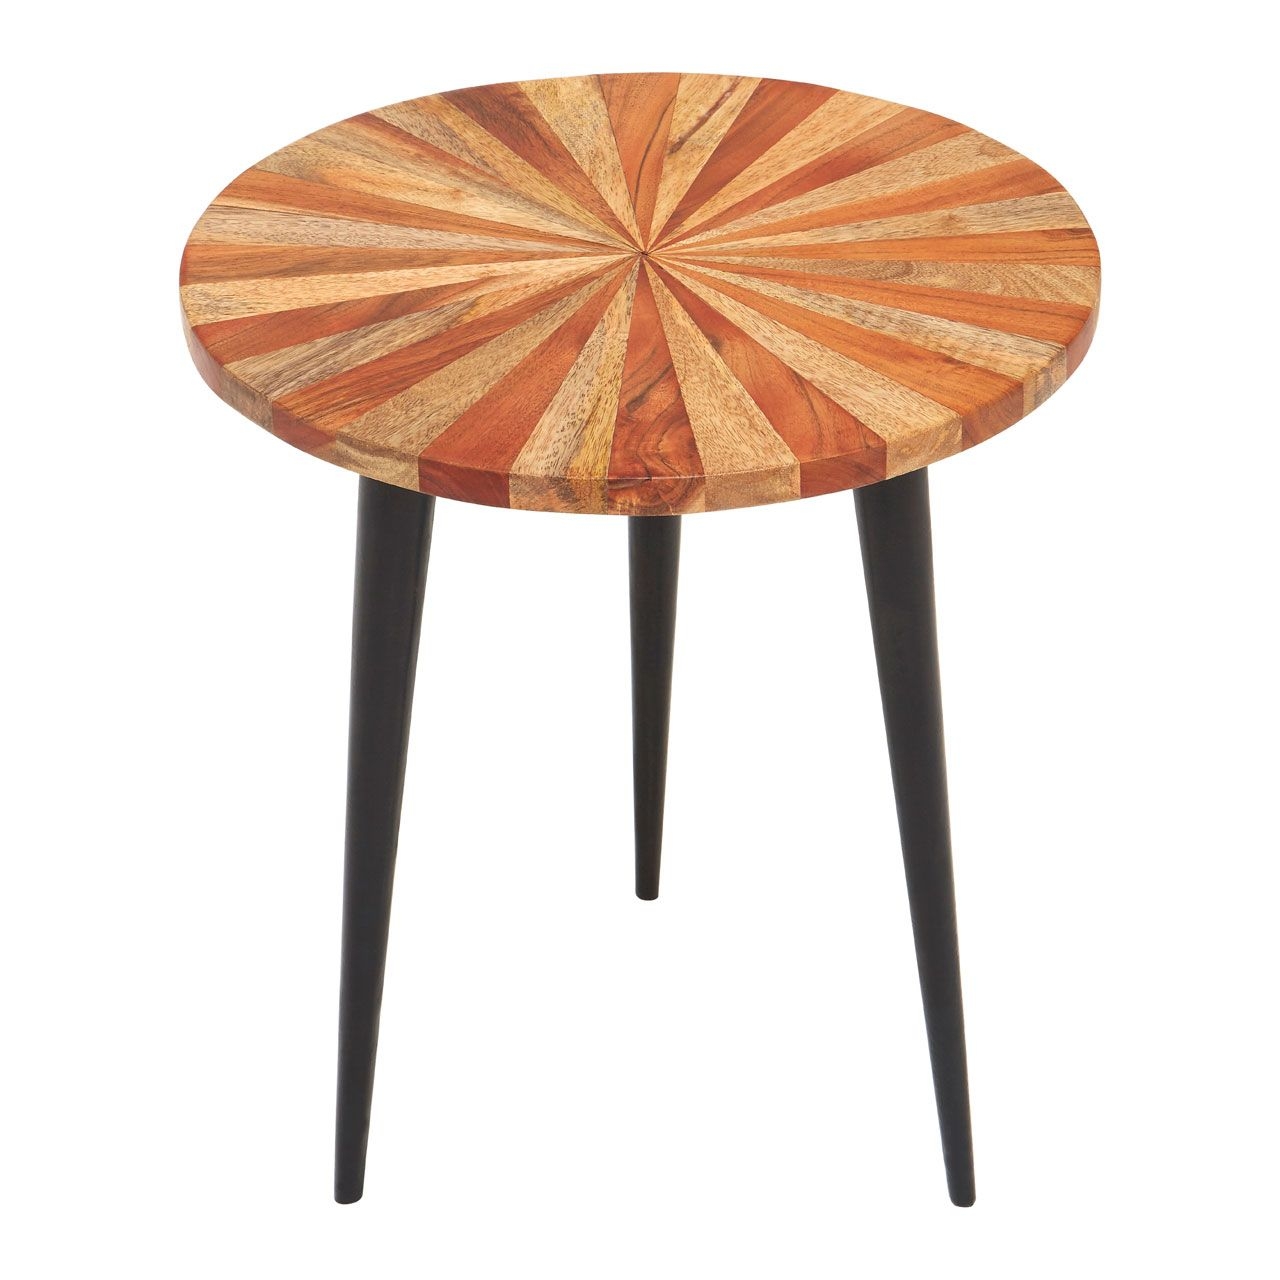 Nandri Small Wooden Round Side Table In Natural With Black Metal Legs